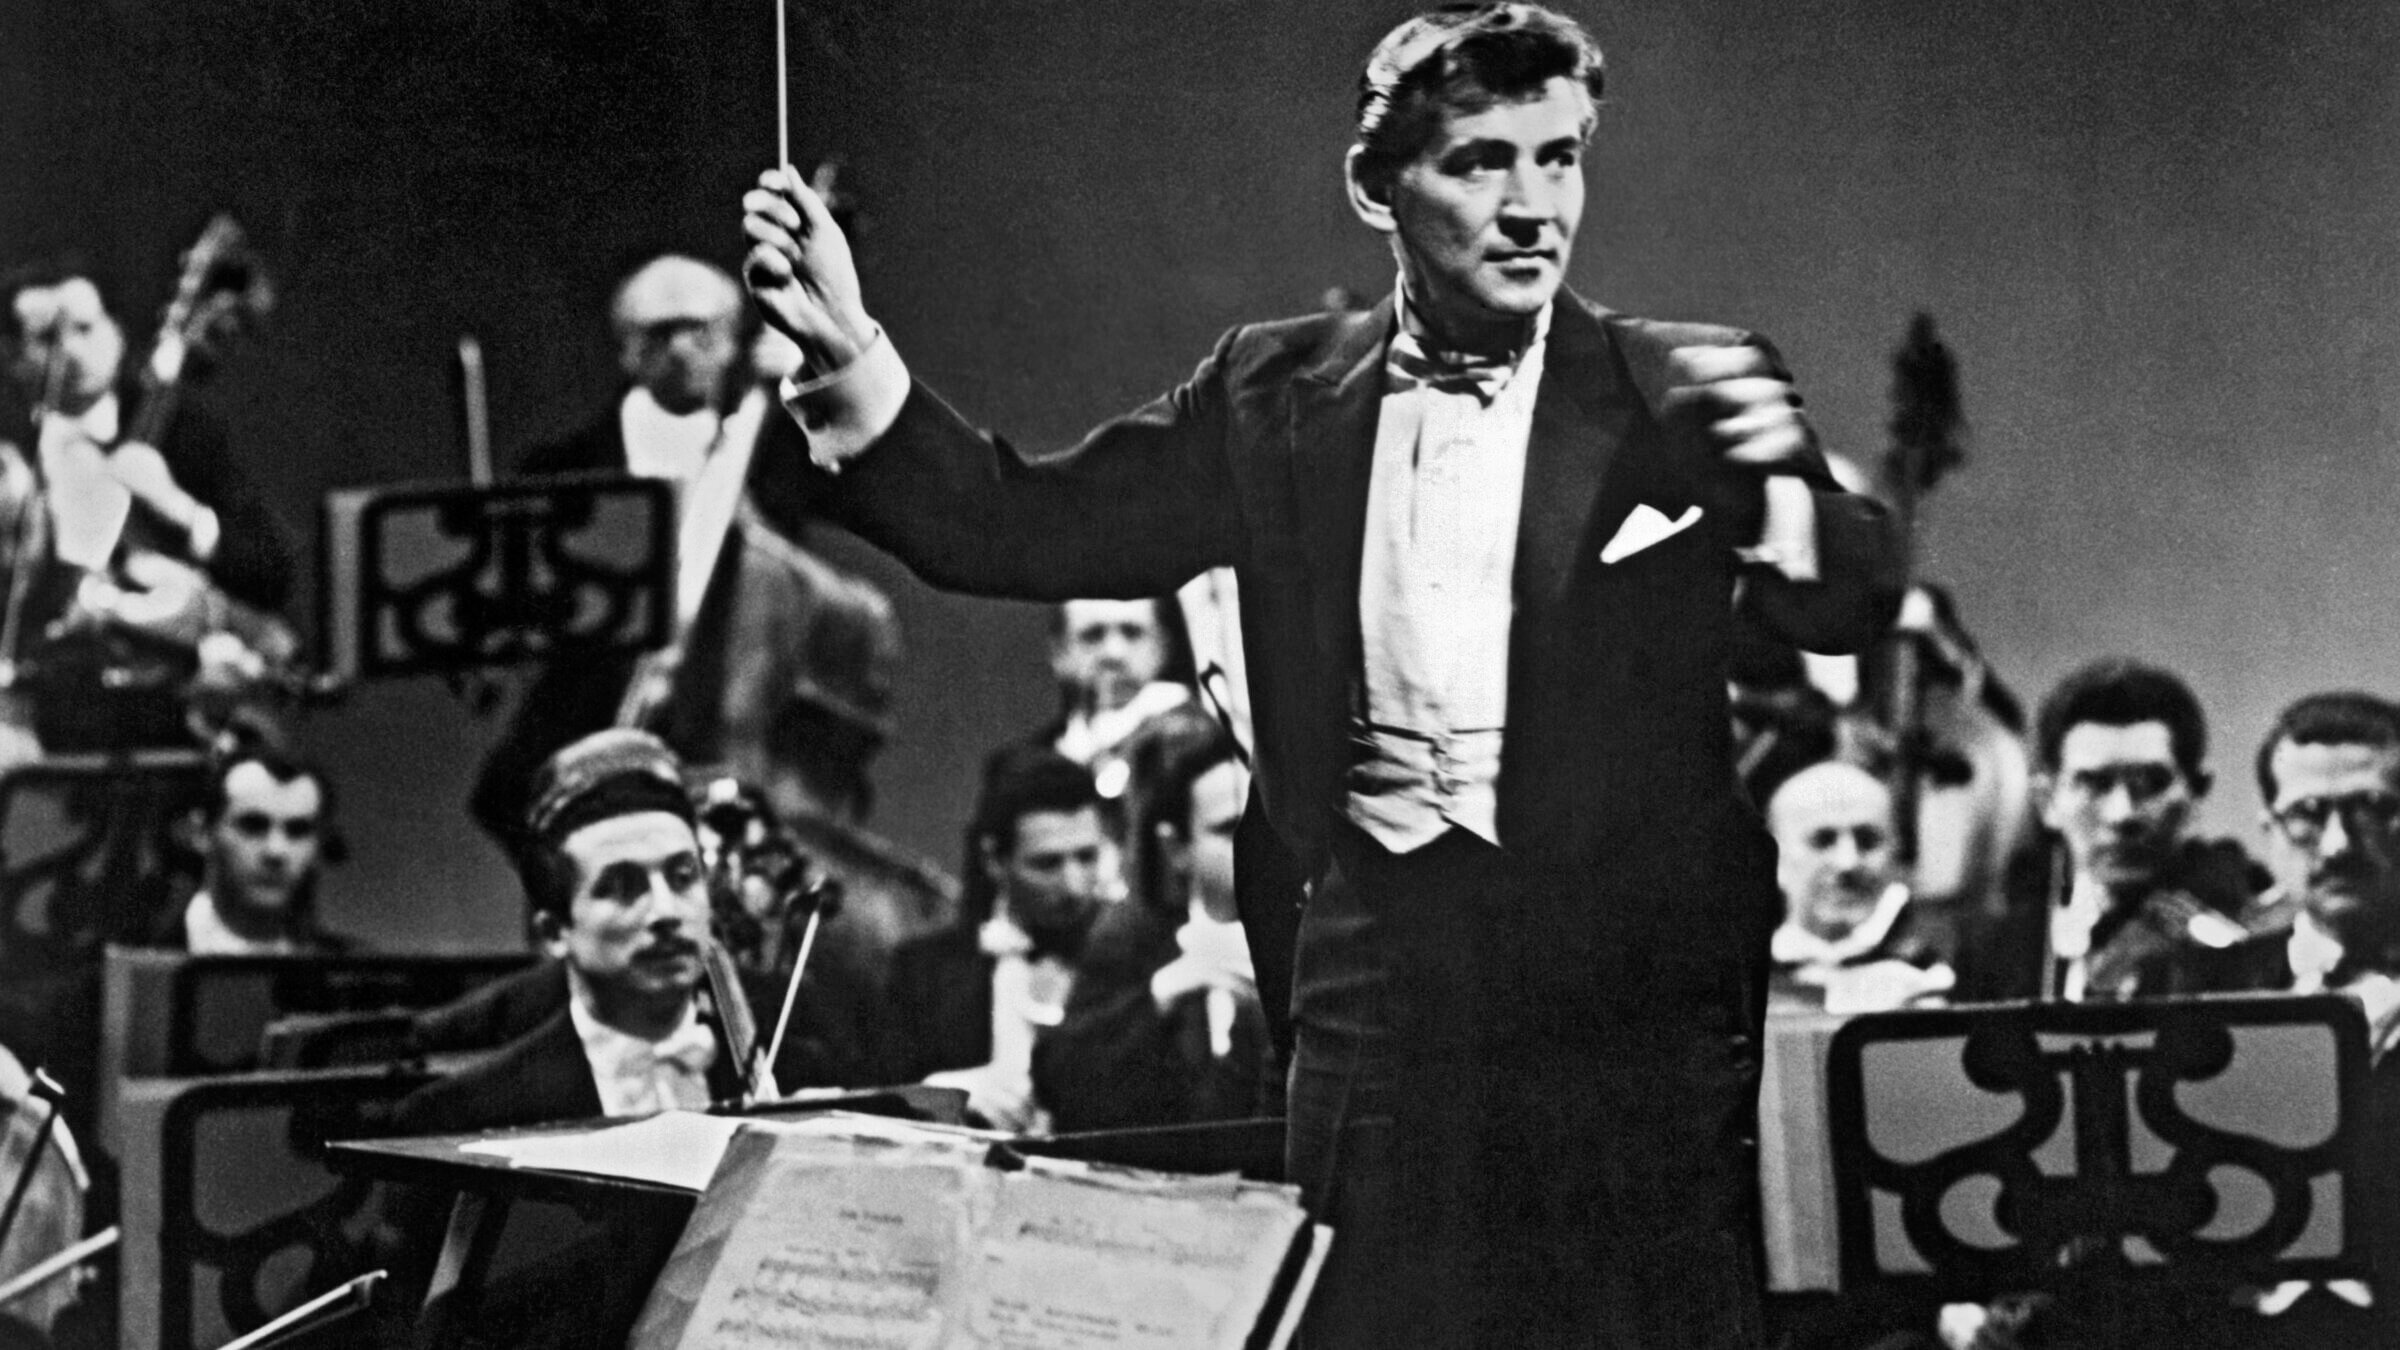 Leonard Bernstein, the subject of an upcoming Bradley Cooper biopic, made up a fictional nation called Rybernia as a child.